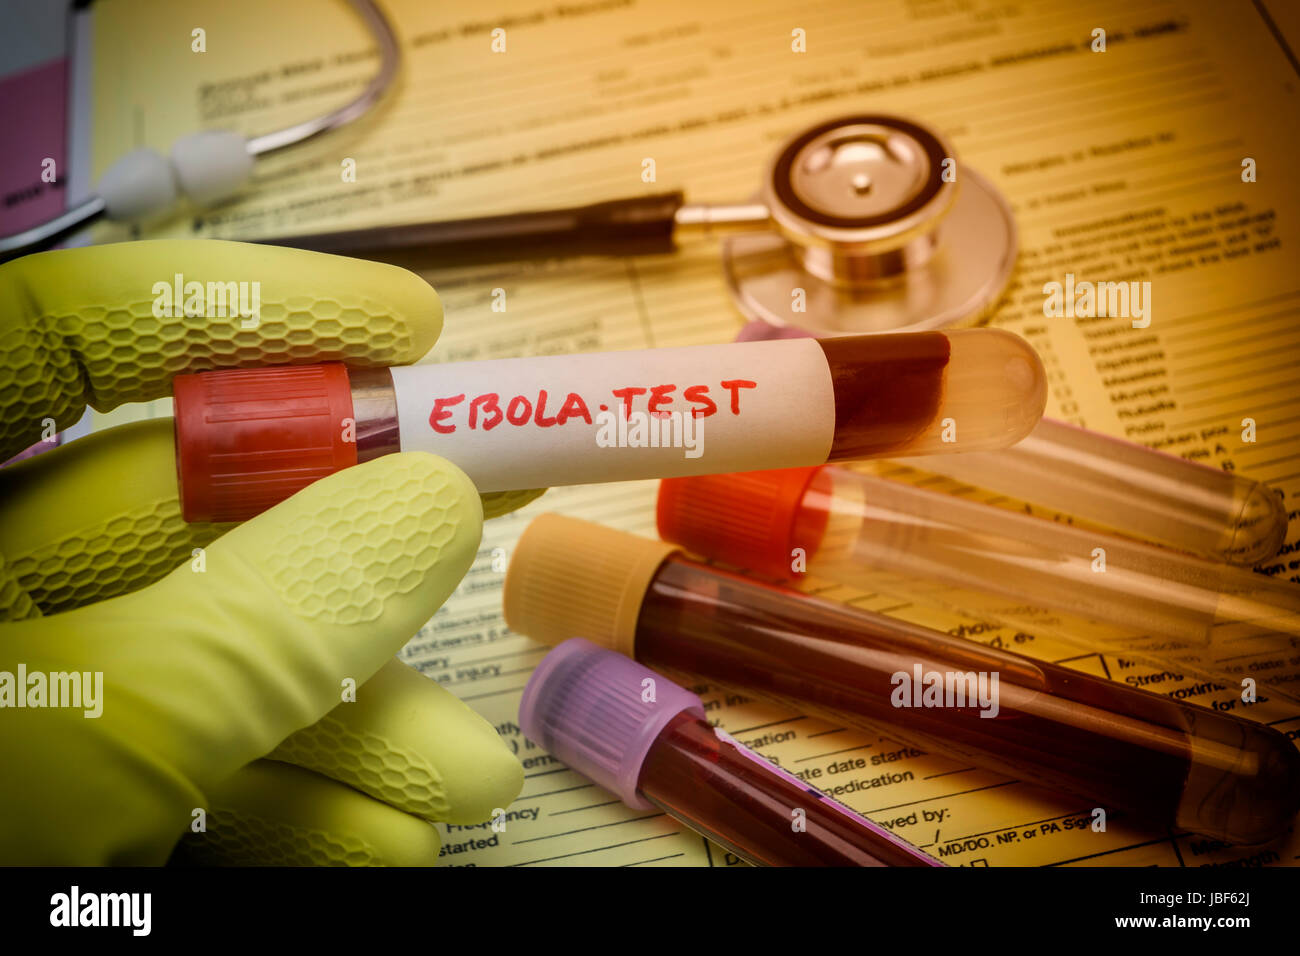 Tests For Research Of Ebola virus, Doctor holding a vial of vaccine virus Ebola Stock Photo